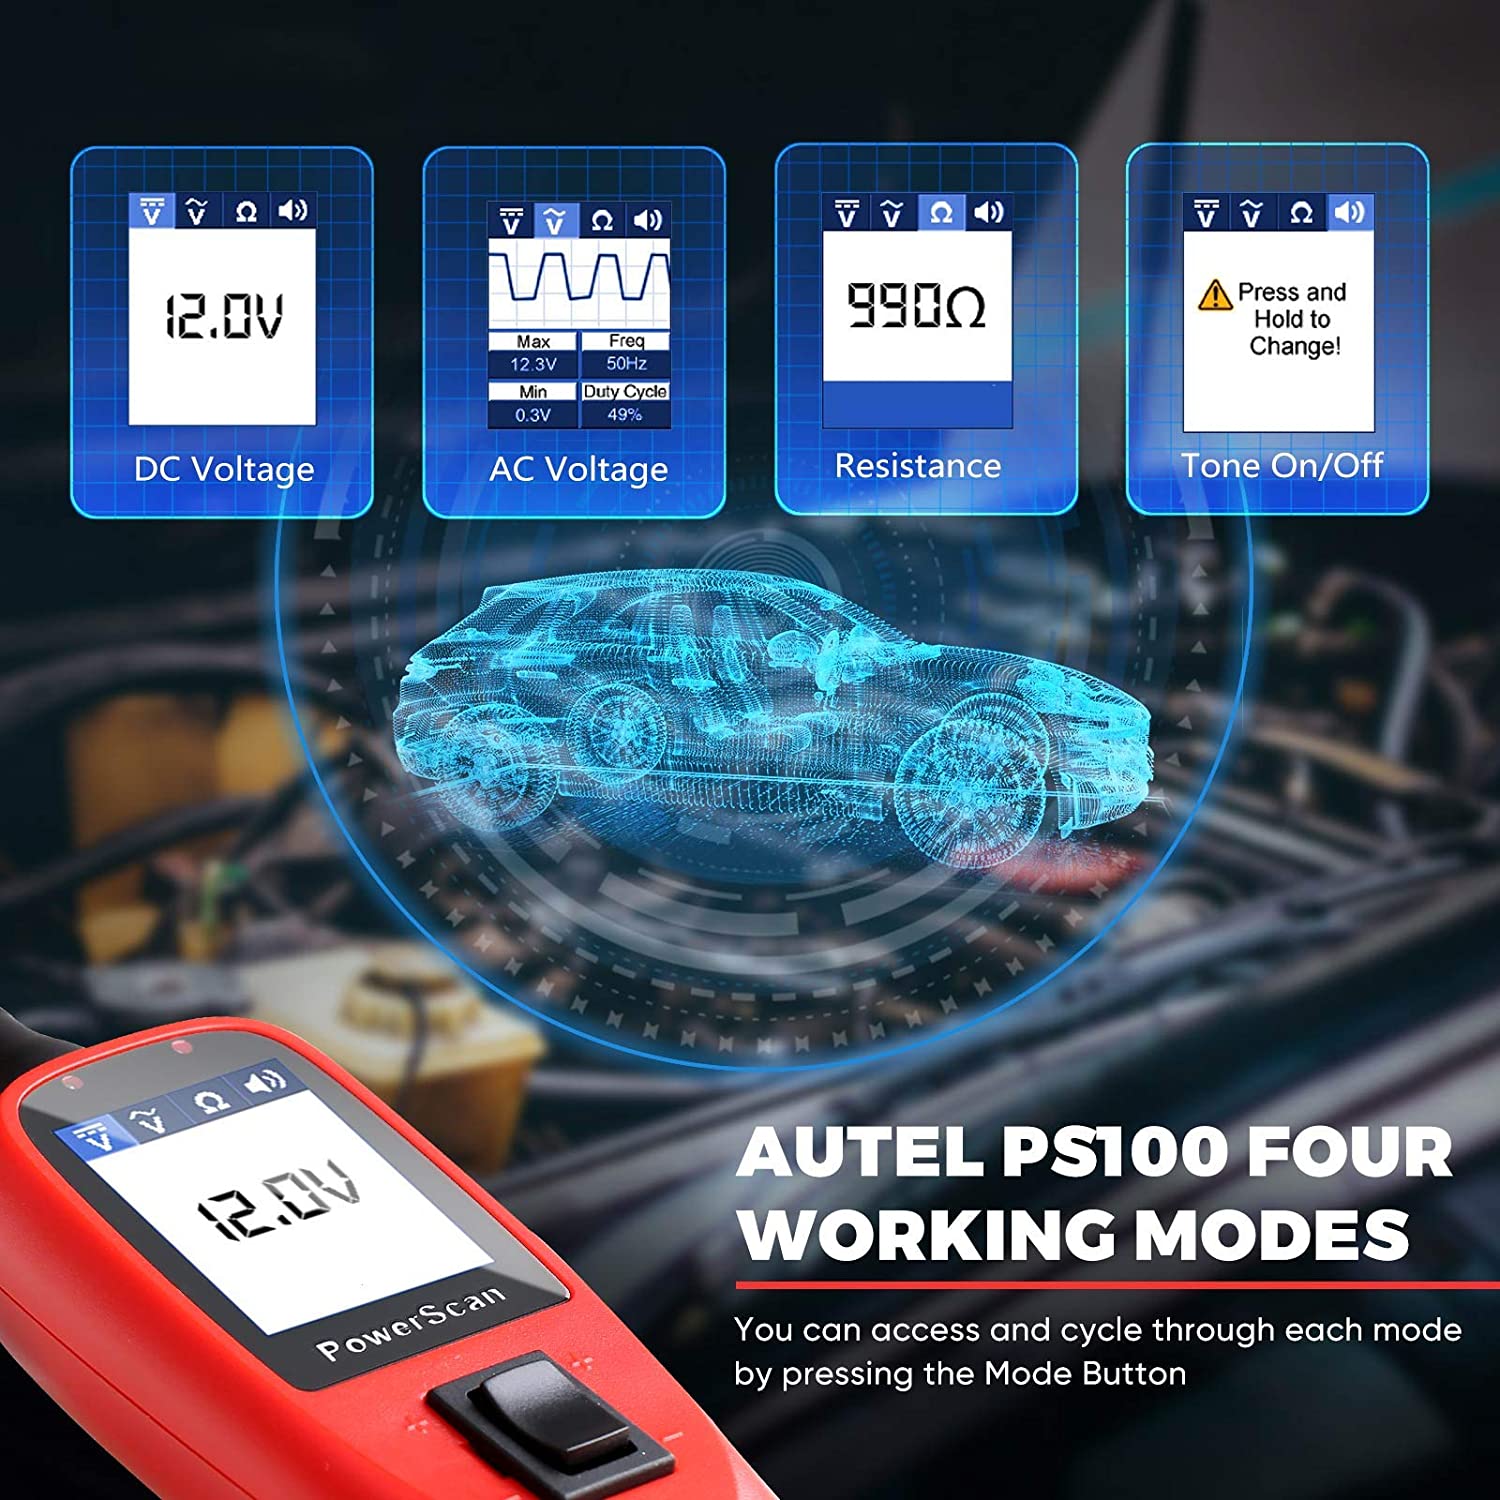 Autel PowerScan PS100 Electrical System Diagnosis Tool Car Automotive OBD2 Scanner Circuit Tester working modes